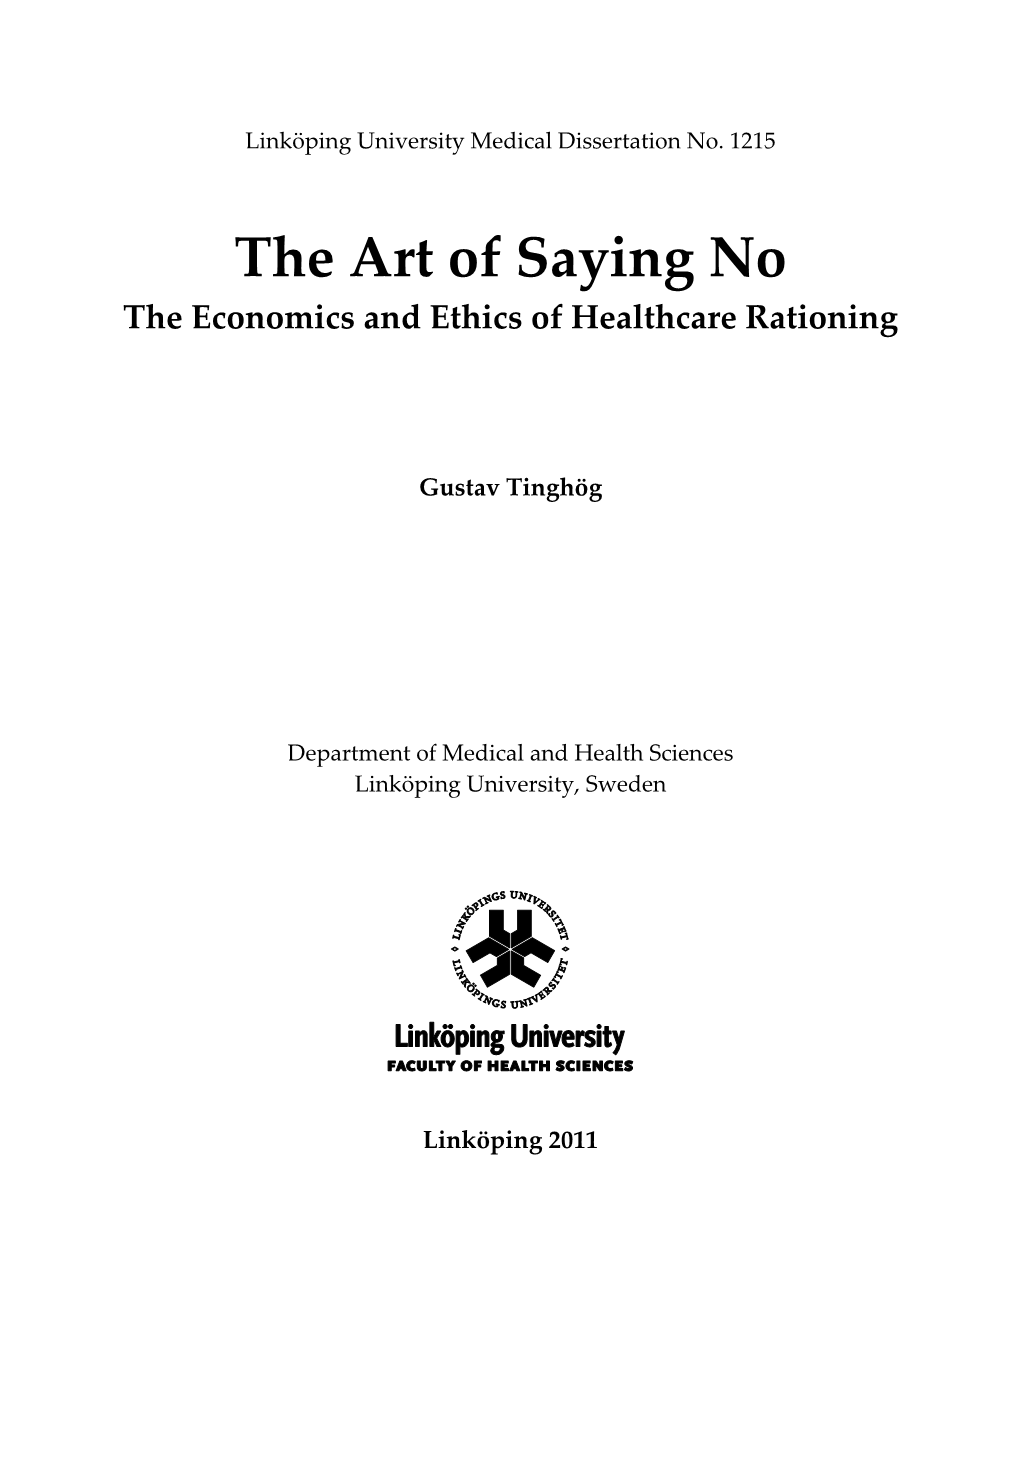 The Art of Saying No the Economics and Ethics of Healthcare Rationing